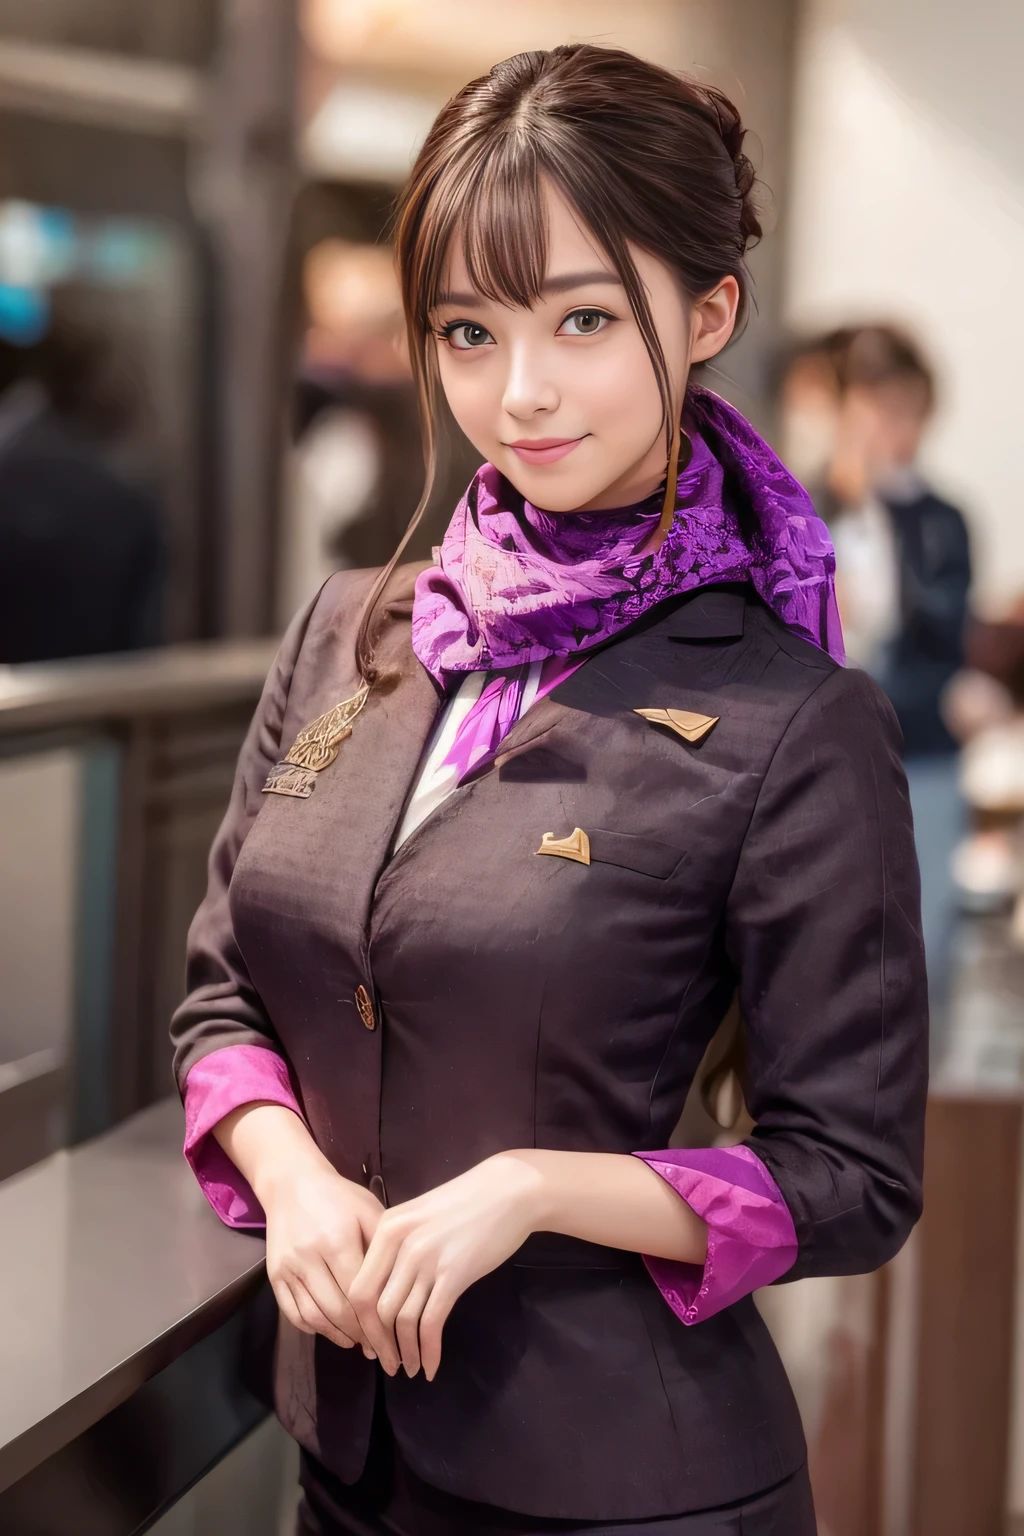 (masterpiece:1.2、highest quality:1.2)、32K HDR、High resolution、(alone、1 girl、Slim figure)、（Realistic reproduction of Etihad Airways flight attendant uniforms）、 (At the airport counter, Professional Lighting)、A proper woman, Beautiful Face,、（Etihad Airways flight attendant long sleeve uniform）、（Etihad Airways flight attendant uniforms、Skirt with purple stripes on the front）、（Scarf around the neck）、Big Breasts、（long hair、Hair Bun）、Dark brown hair、Long Shot、（（Great hands：2.0））、（（Harmonious body proportions：1.5））、（（Normal limbs：2.0））、（（Normal finger：2.0））、（（Delicate eyes：2.0））、（（Normal eyes：2.0））)、Beautiful standing posture、smile